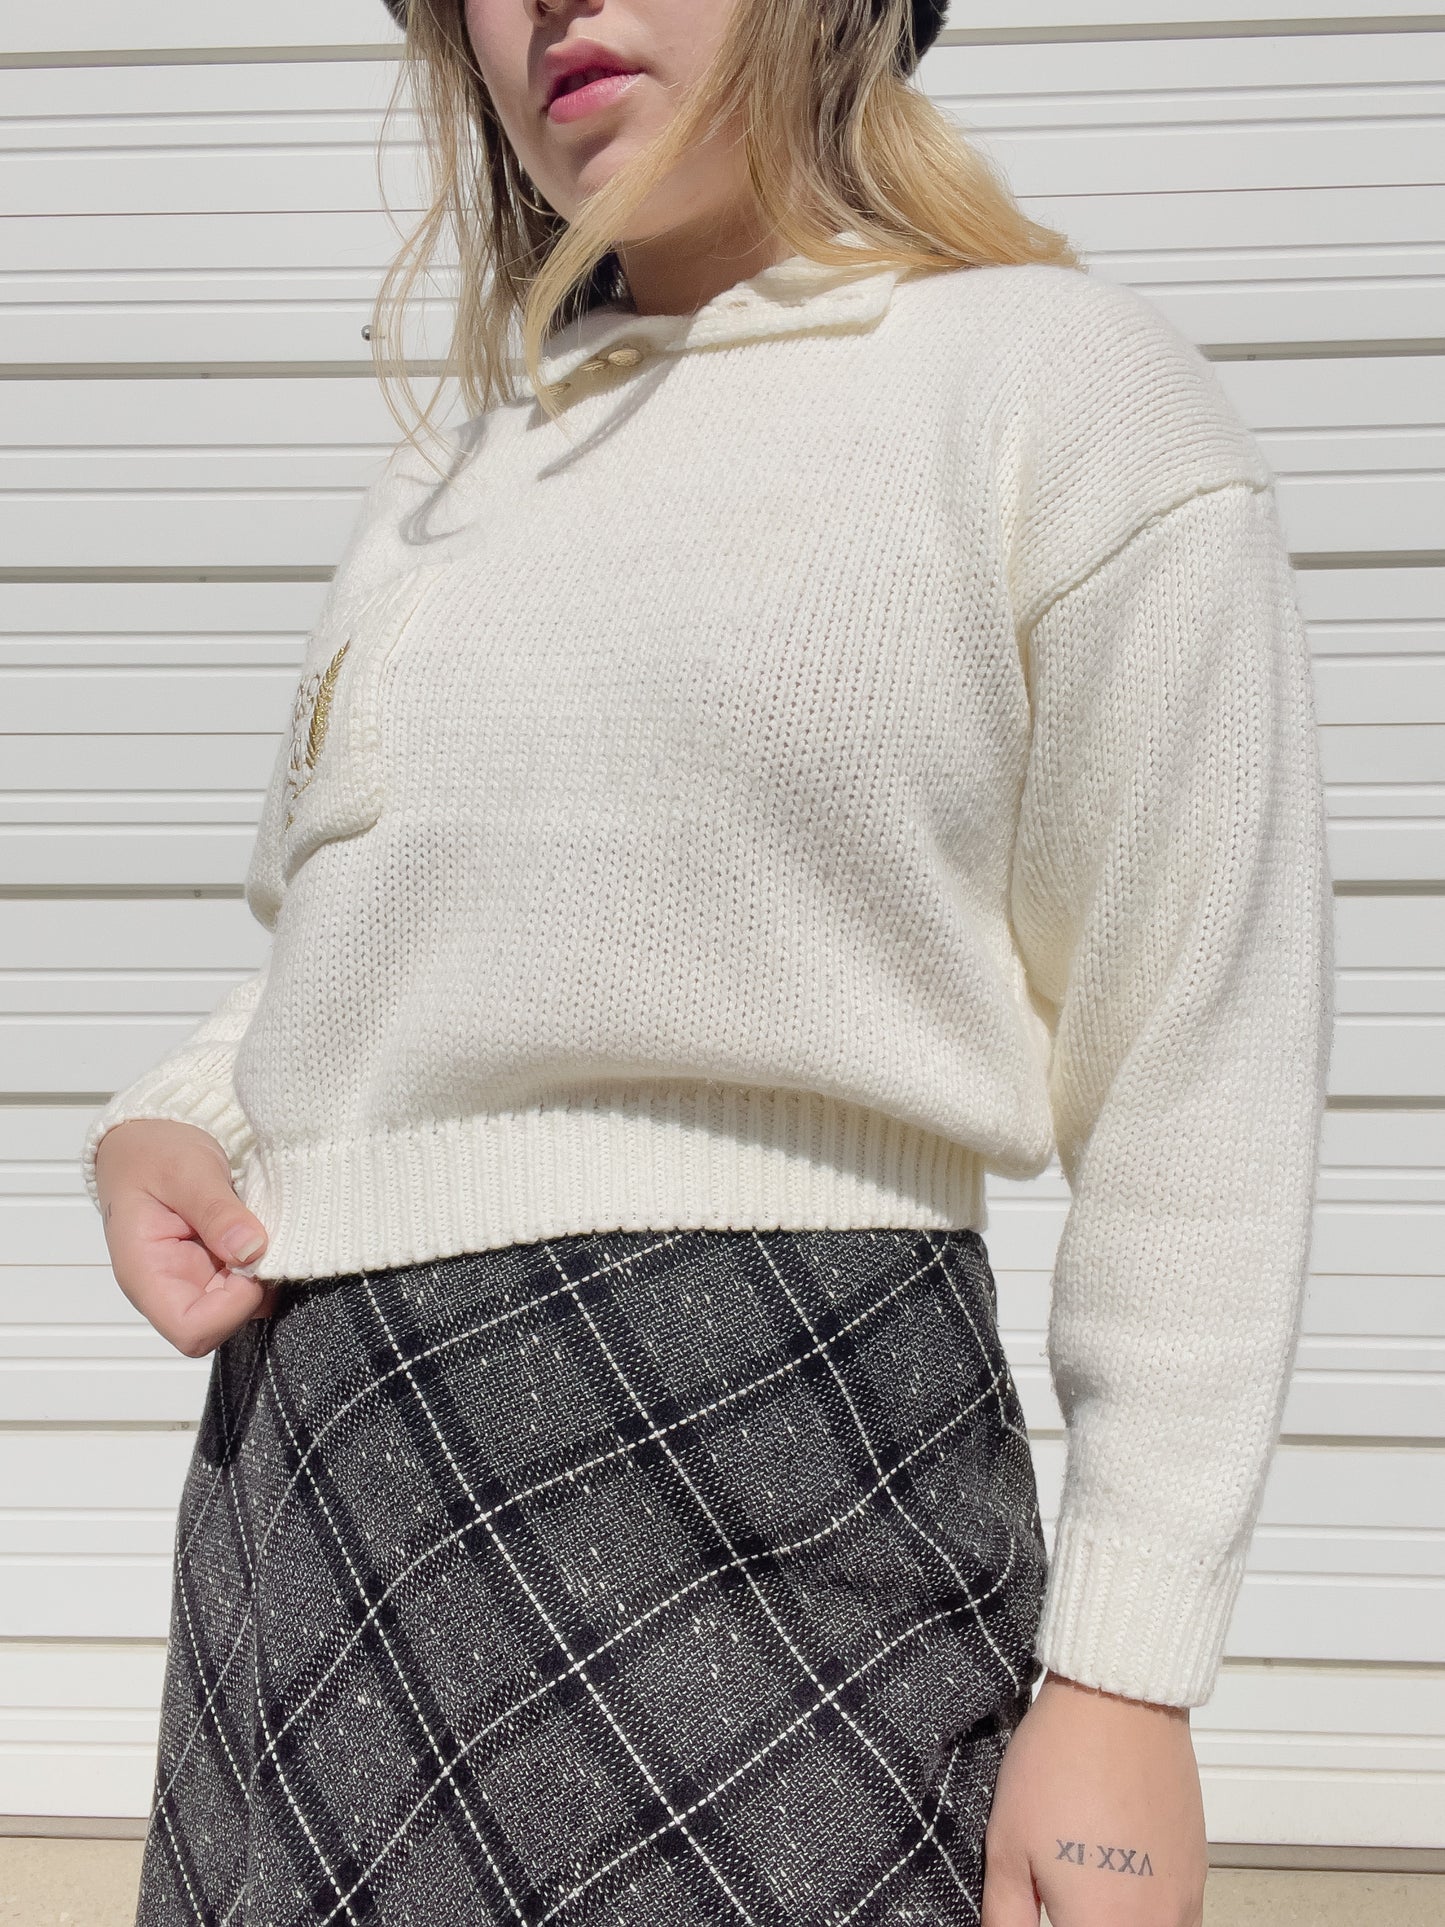 90s Cream Cropped Sweater w/ Button Up Collar (L)